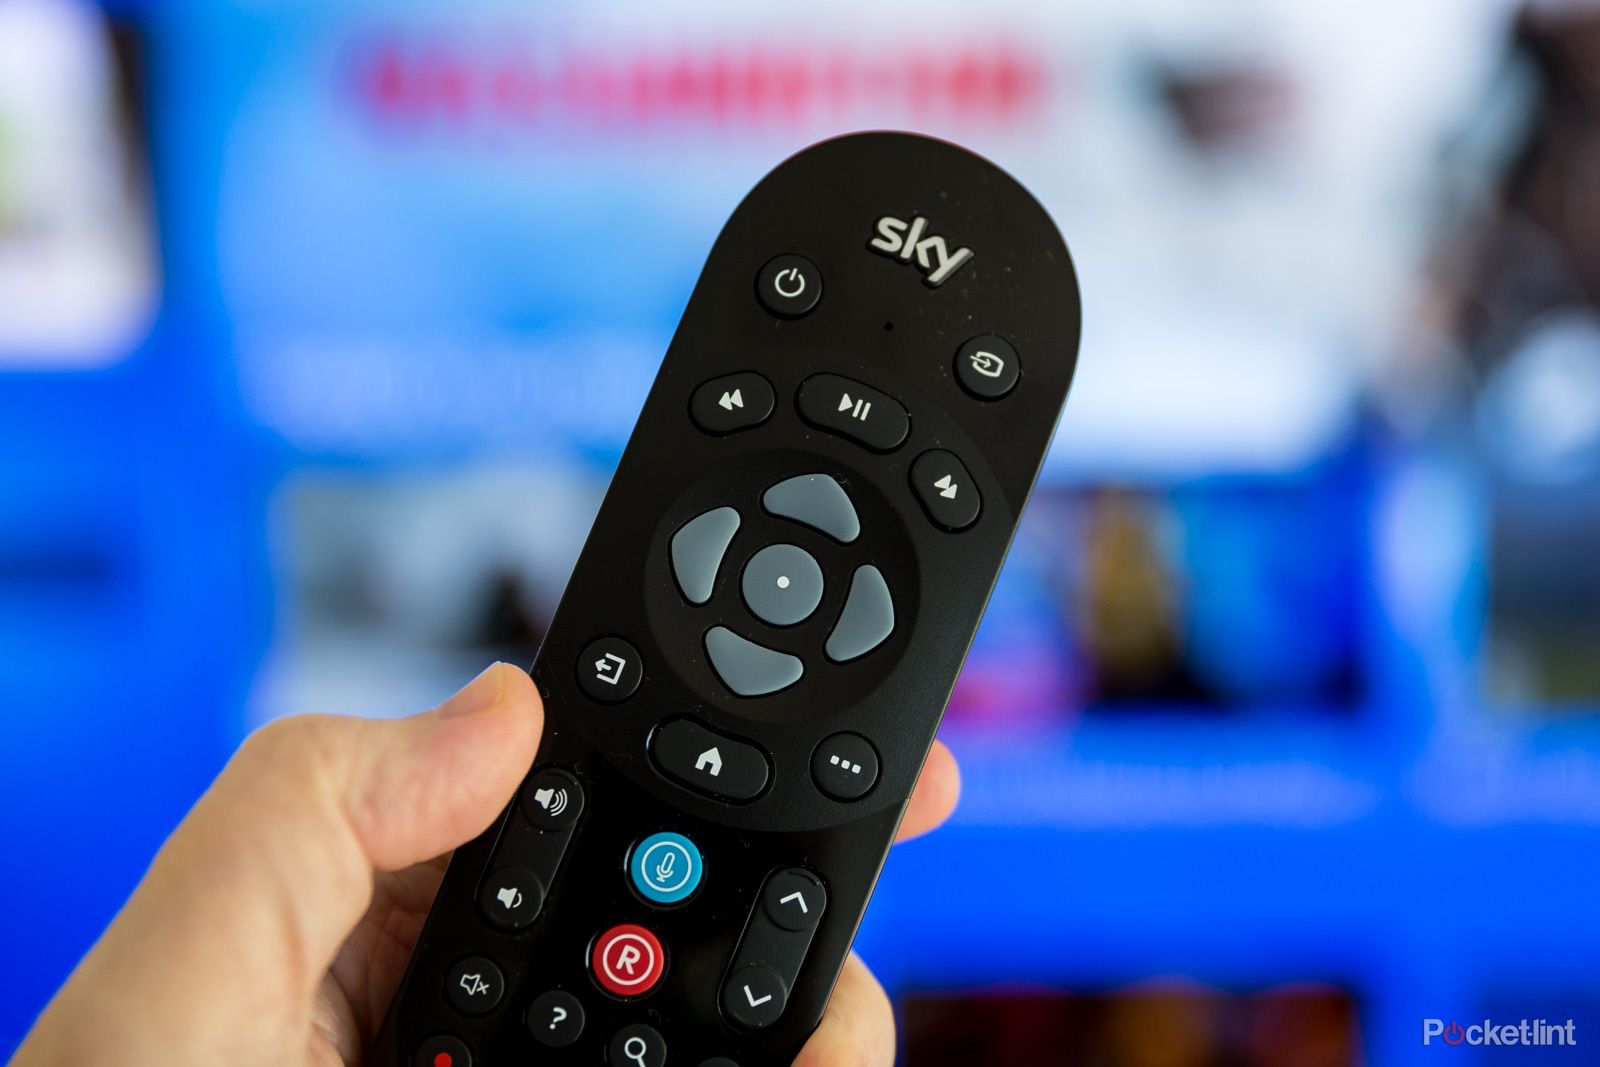 sky-q-tips-and-tricks:-get-the-most-from-your-sky-q-box-and-remote-control